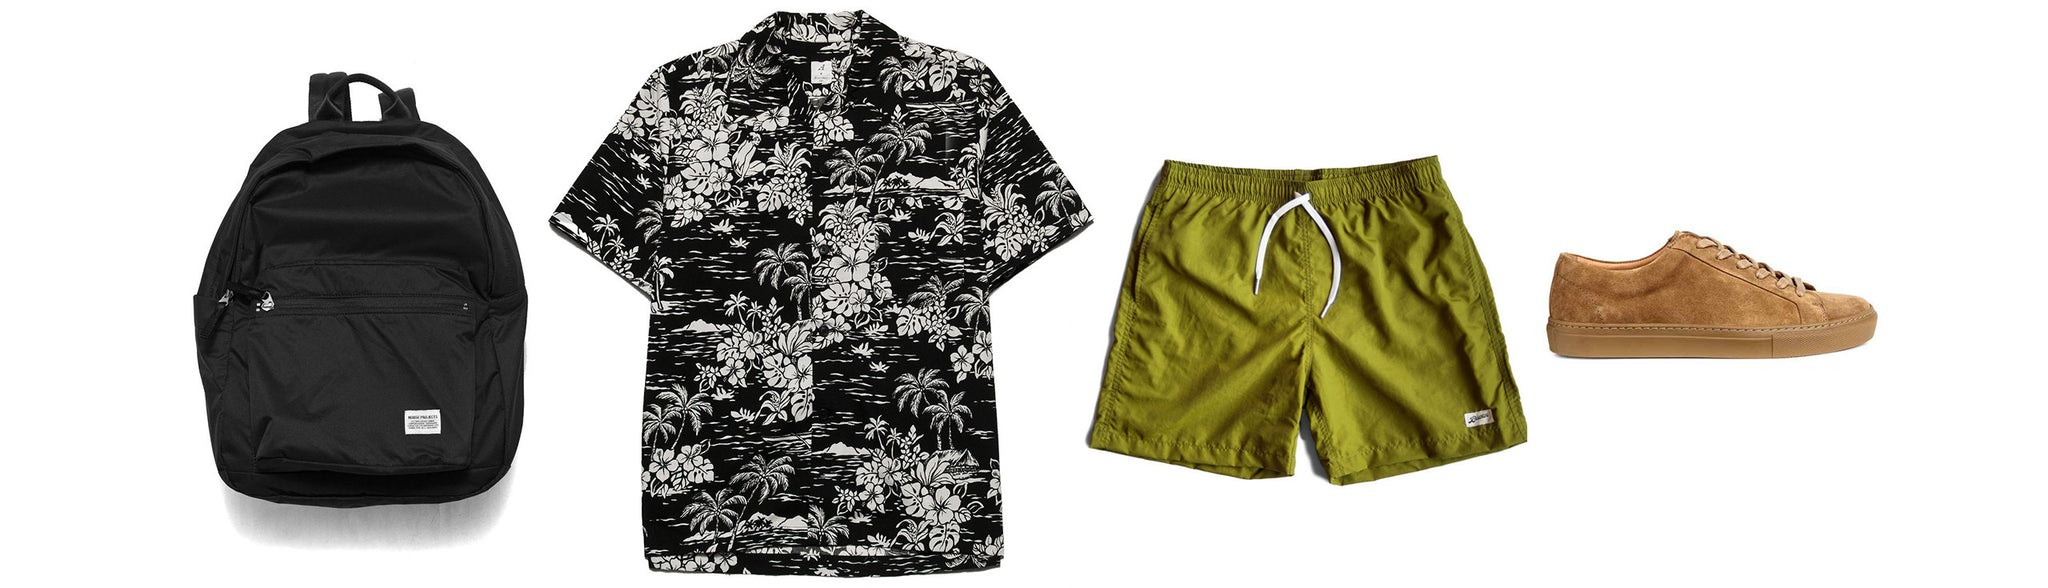 Bather Men's Swim Trunks Style Inspiration and Outfit Ideas